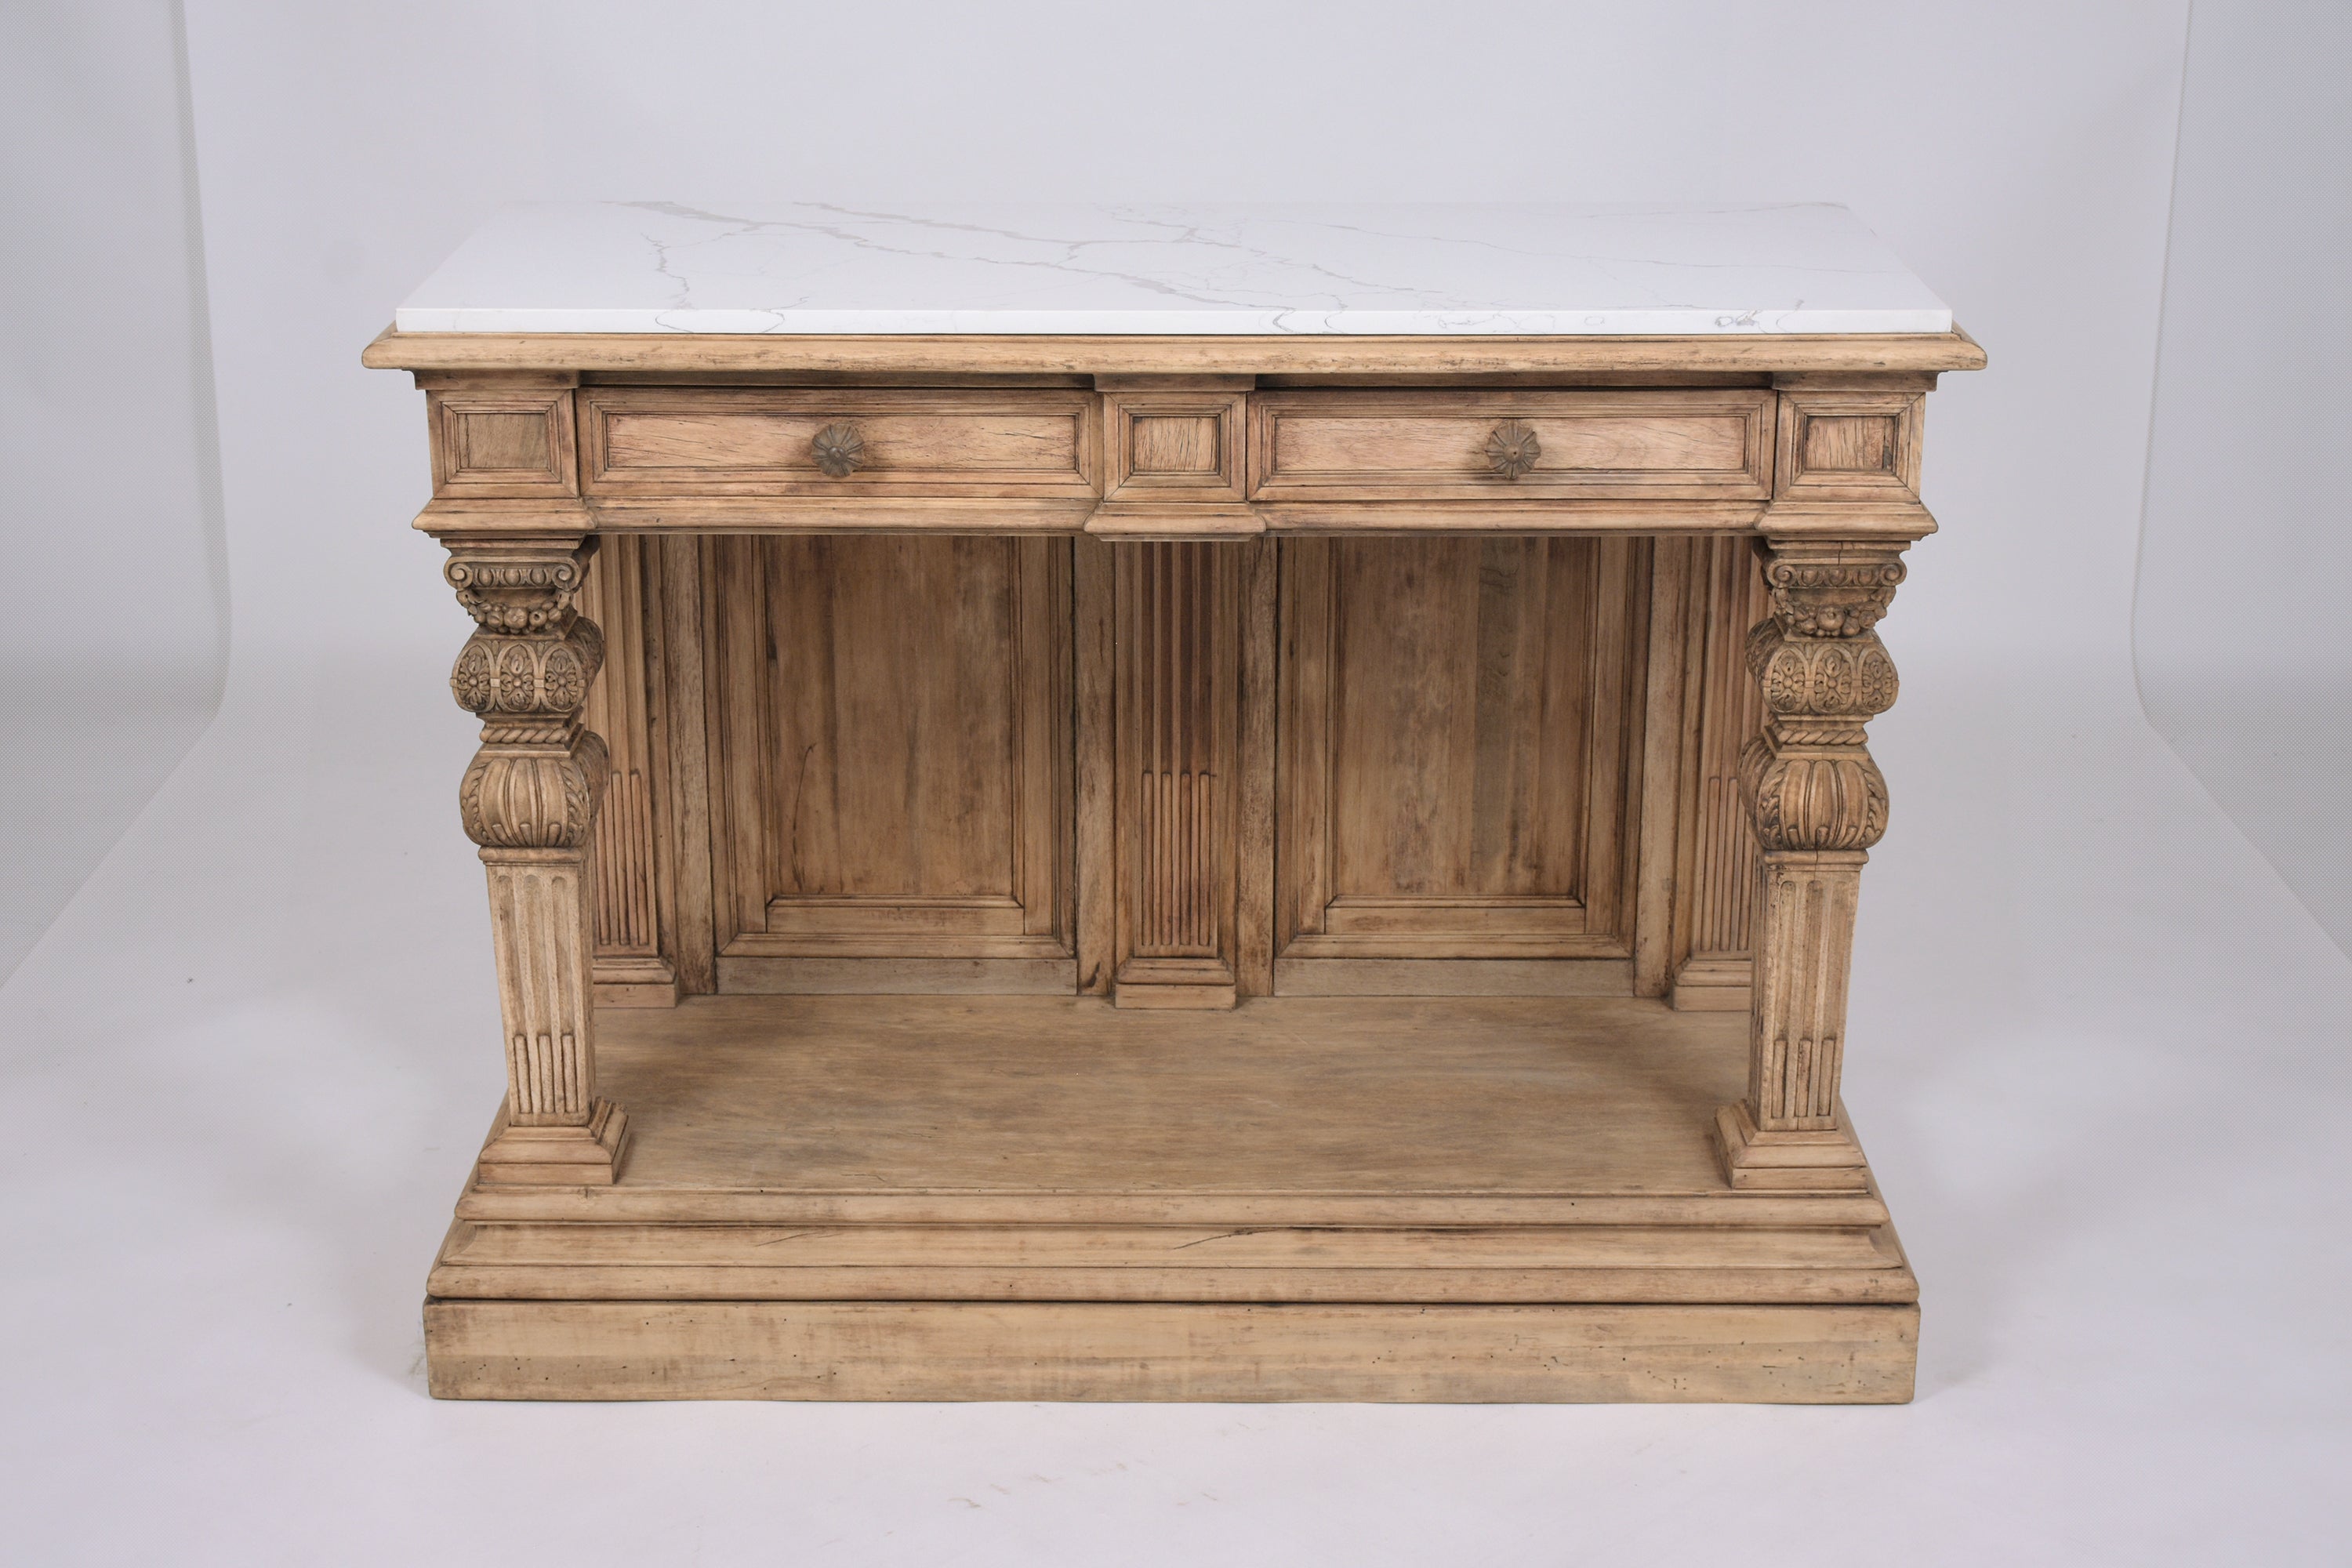 An extraordinary antique baroque carved console beautifully crafted out of walnut wood in great condition and completely restored by our craftsmen team. This server features a white marble with grey vines marble top, a unique bleached wood finish